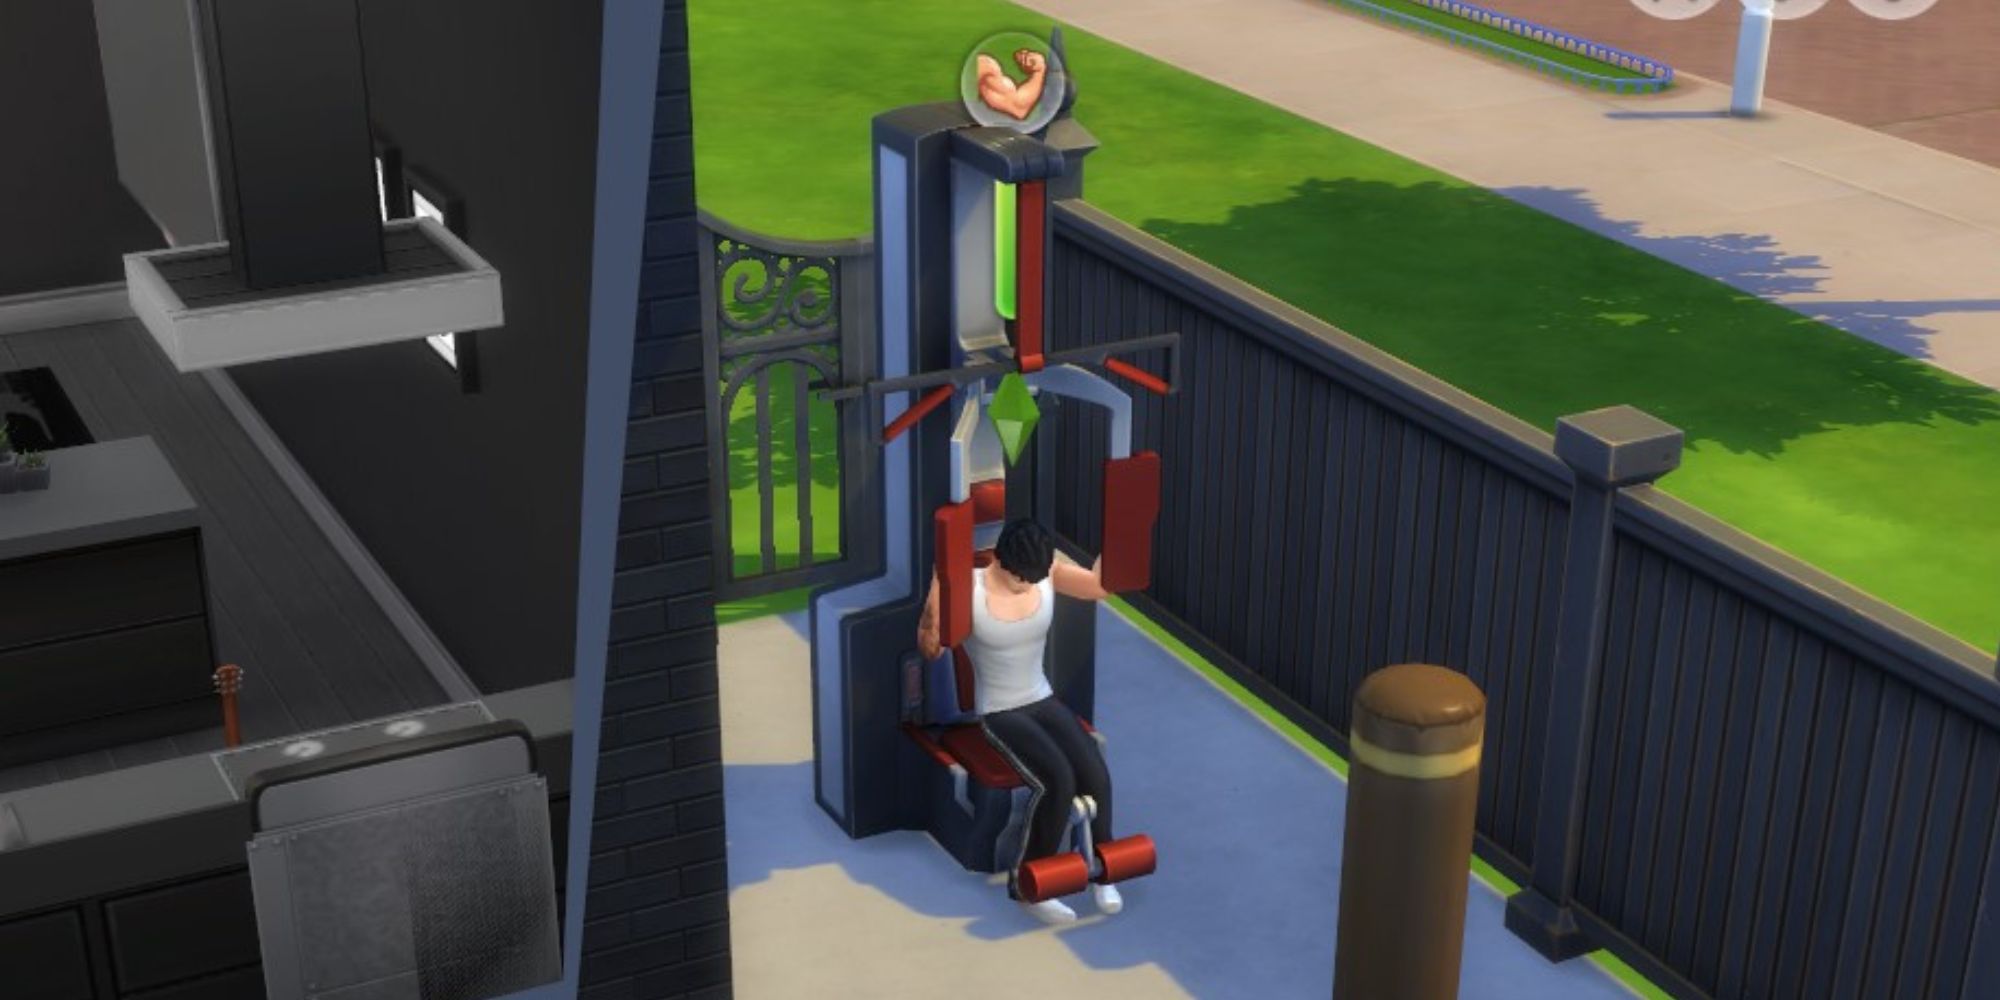 Bad Sim lifting heavy objects in The Sims 4.